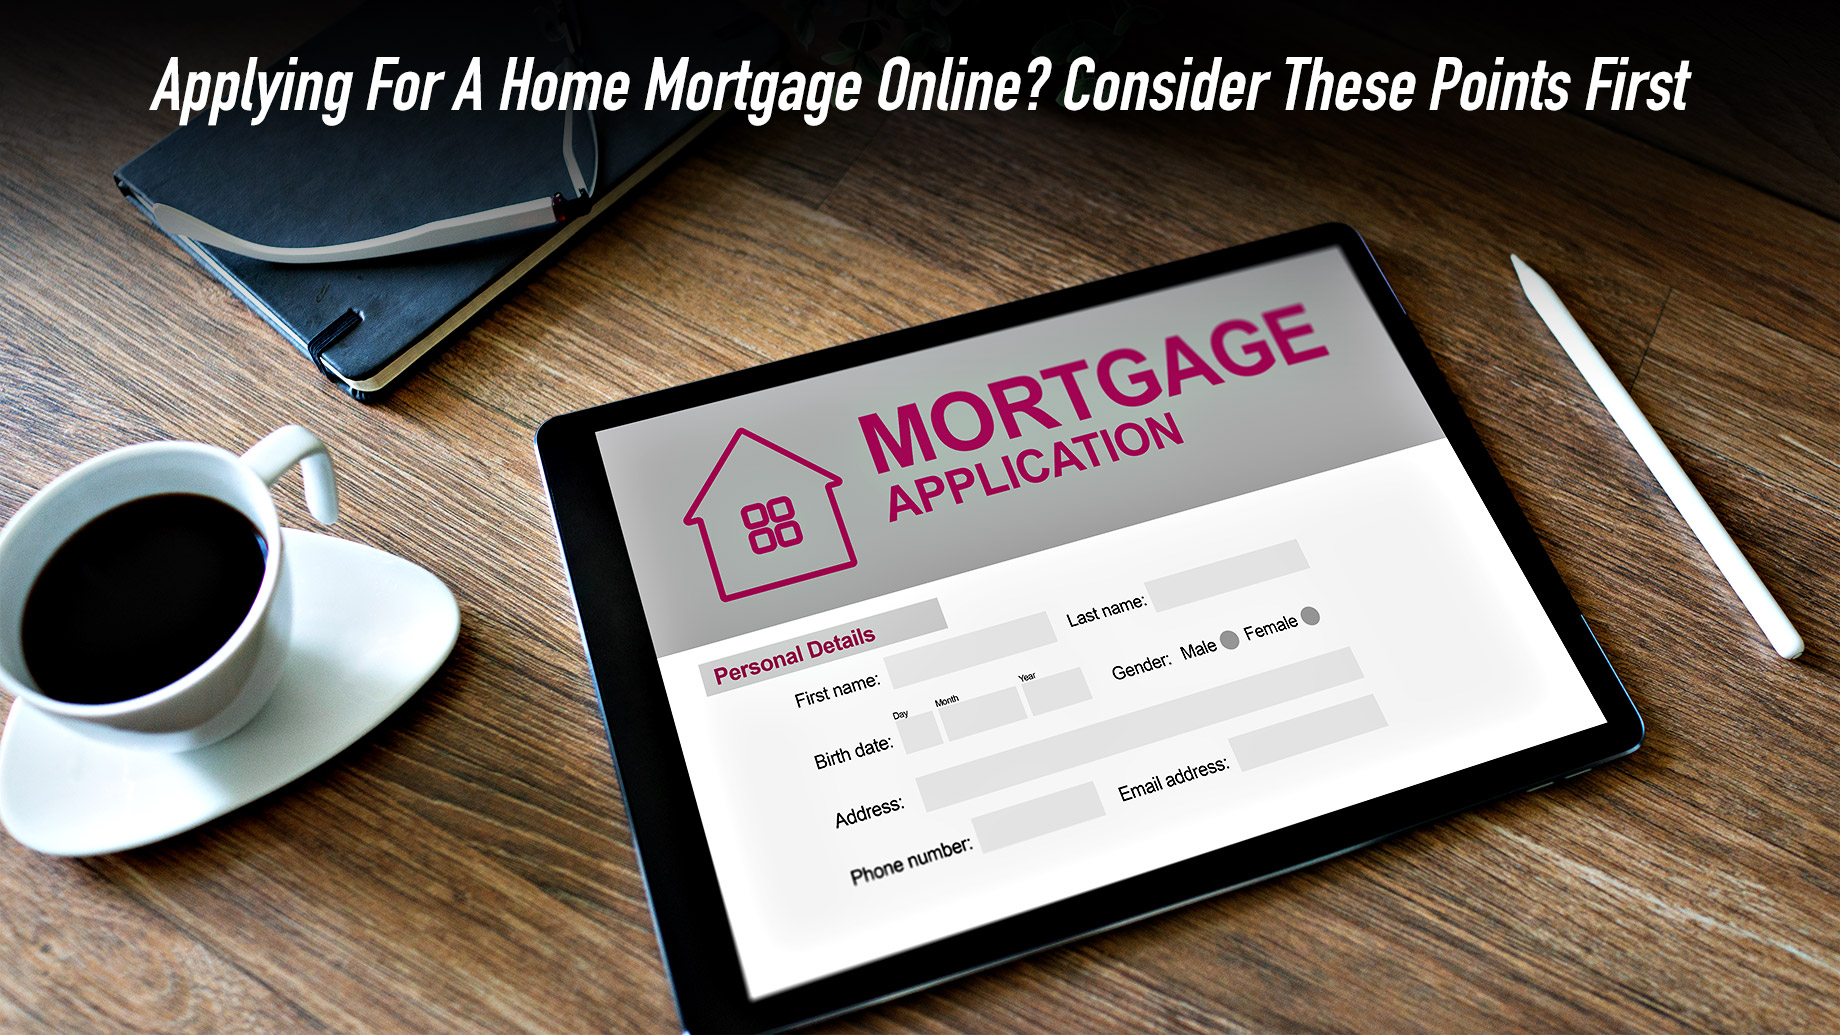 Applying For A Home Mortgage Online? Consider These Points First